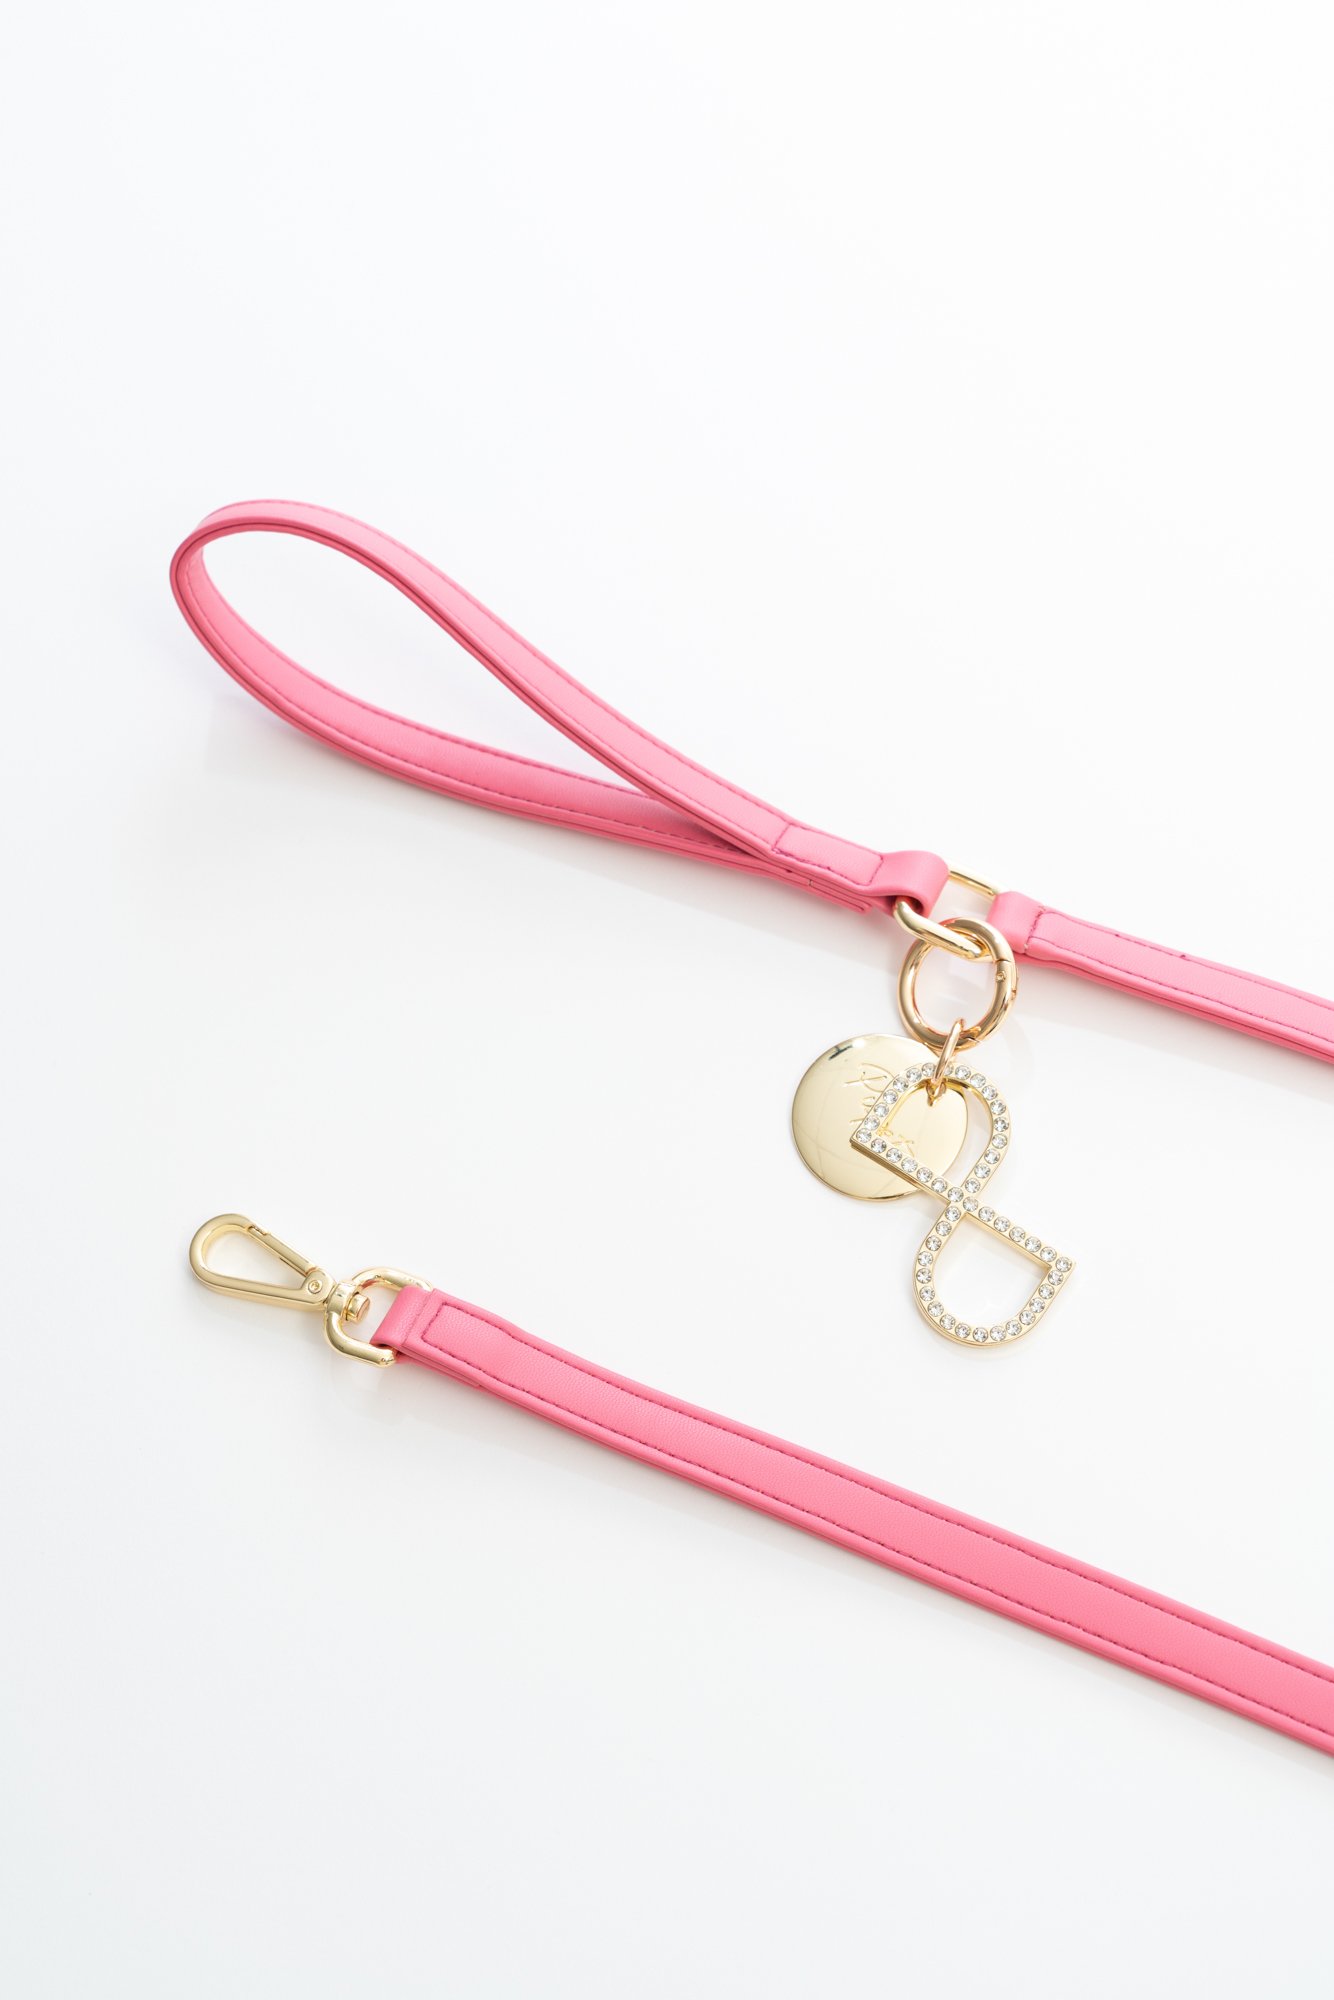 LEATHERETTE LEASH WITH CHARM